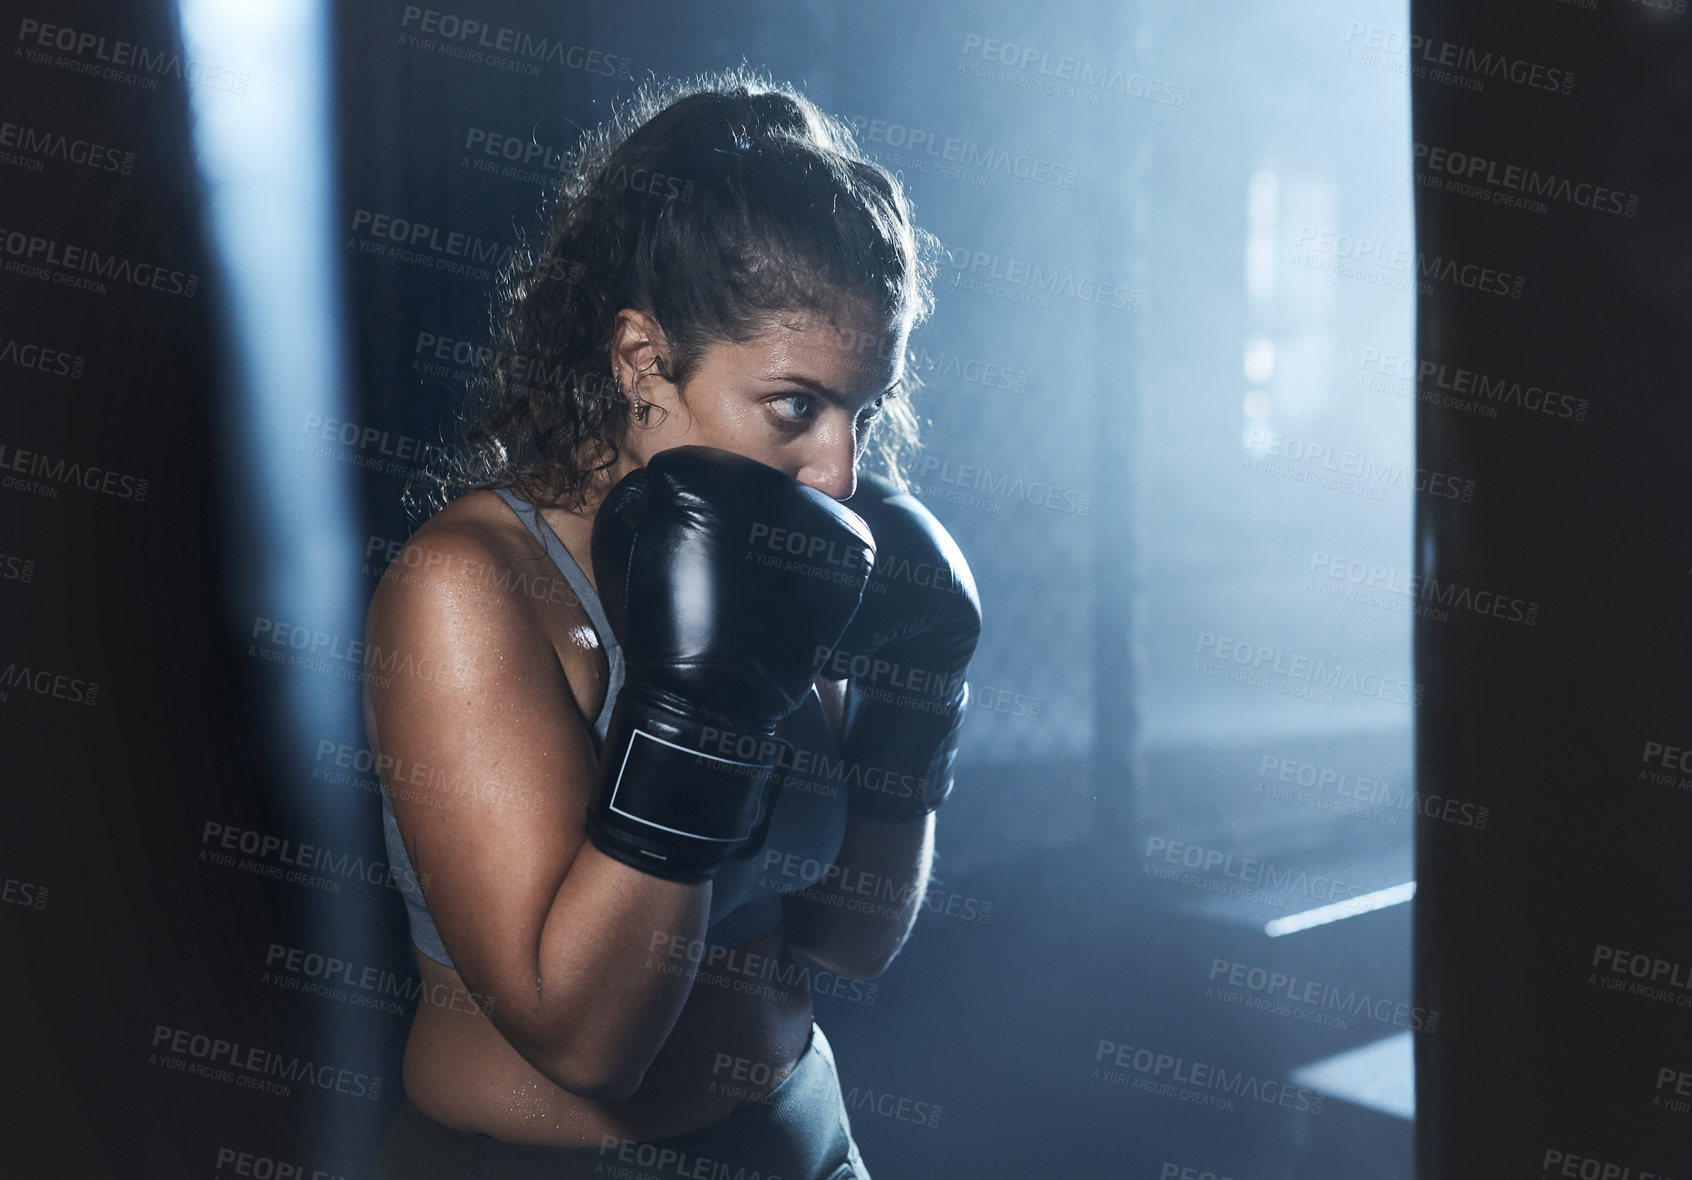 Buy stock photo Shot of a sporty young woman boxing in a gym